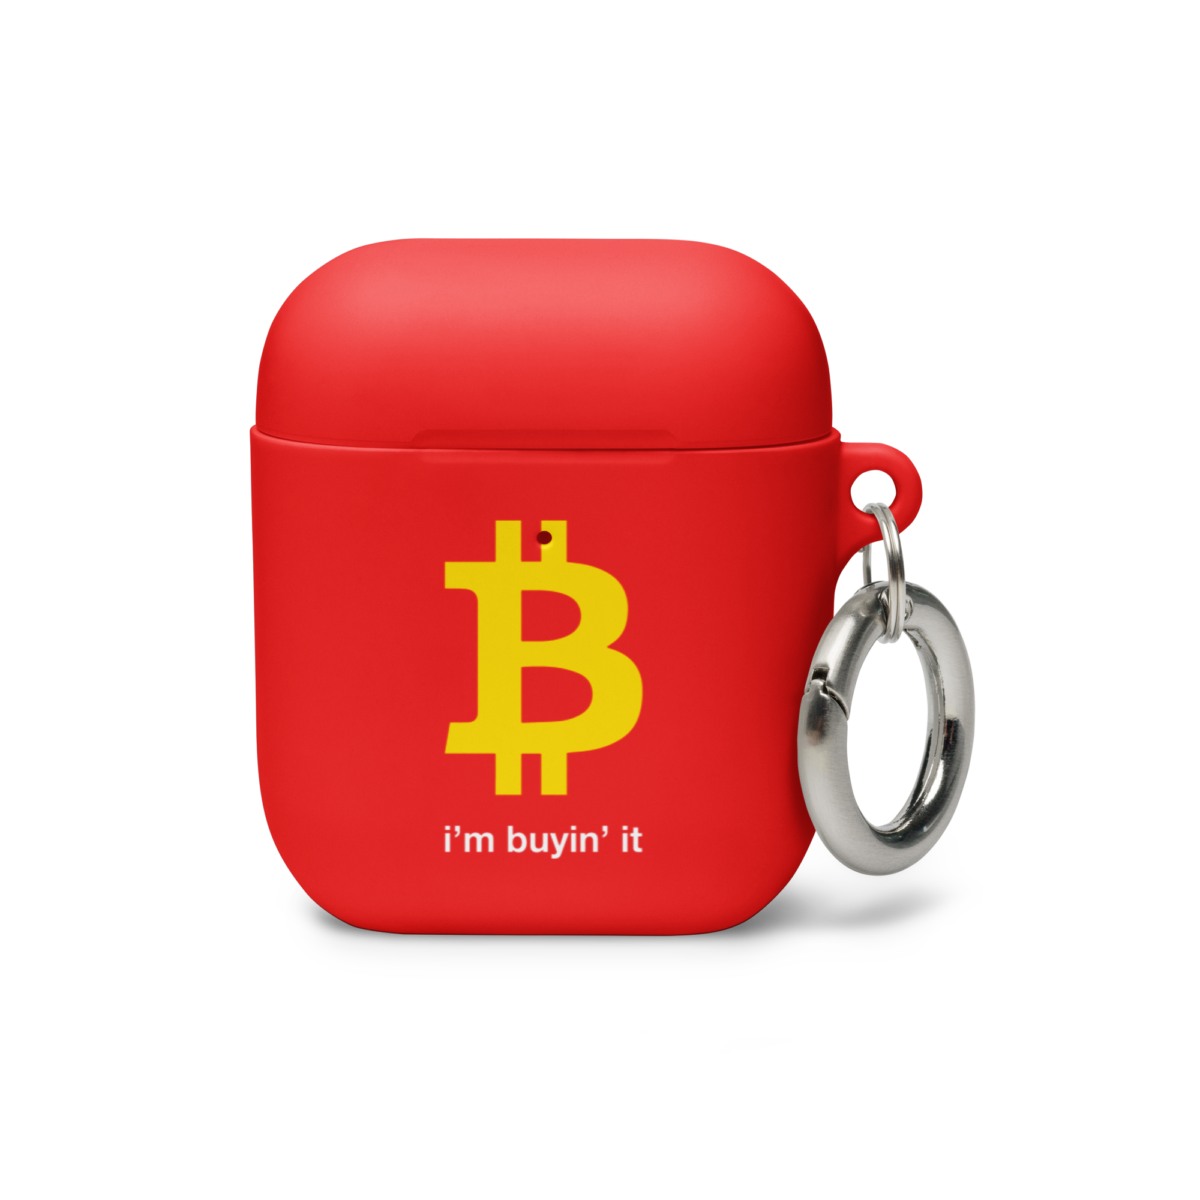 airpods case red airpods front 62e1a7eac5f97 - Bitcoin: I'm Buyin' It AirPods Case